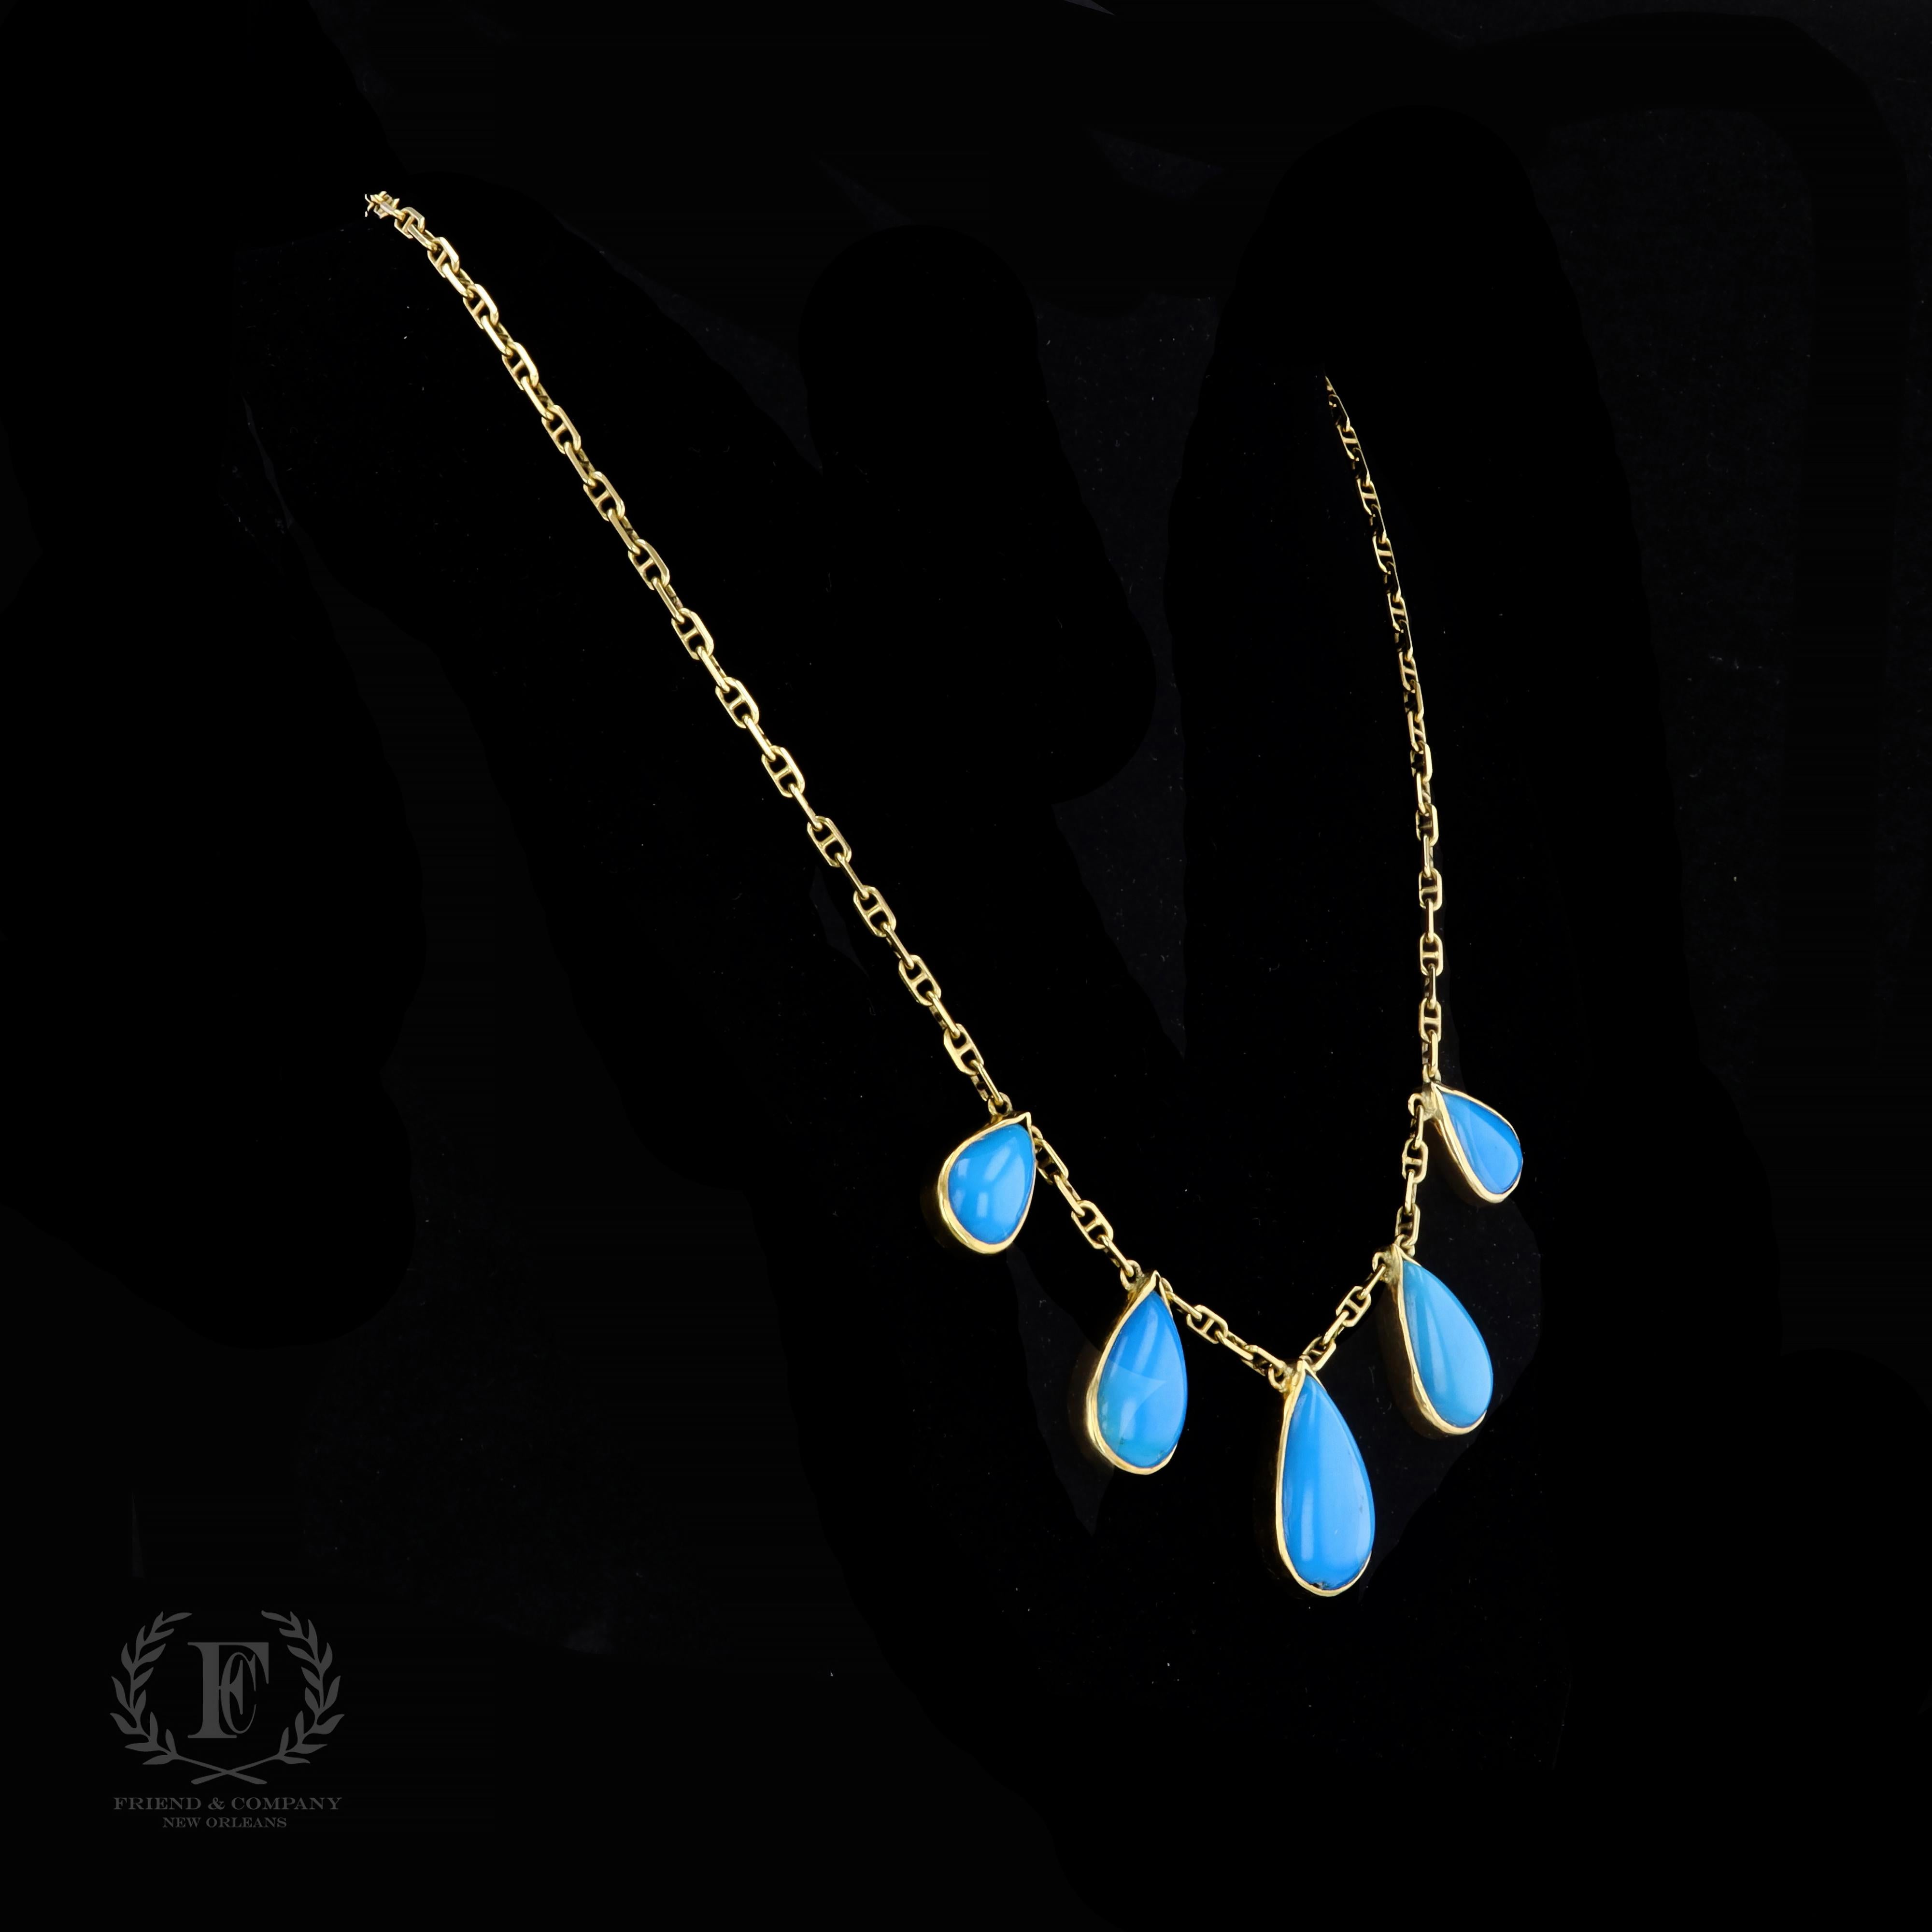 Vibrant Pear Cabochon Turquoise and 18k Yellow Gold Necklace In Excellent Condition For Sale In NEW ORLEANS, LA